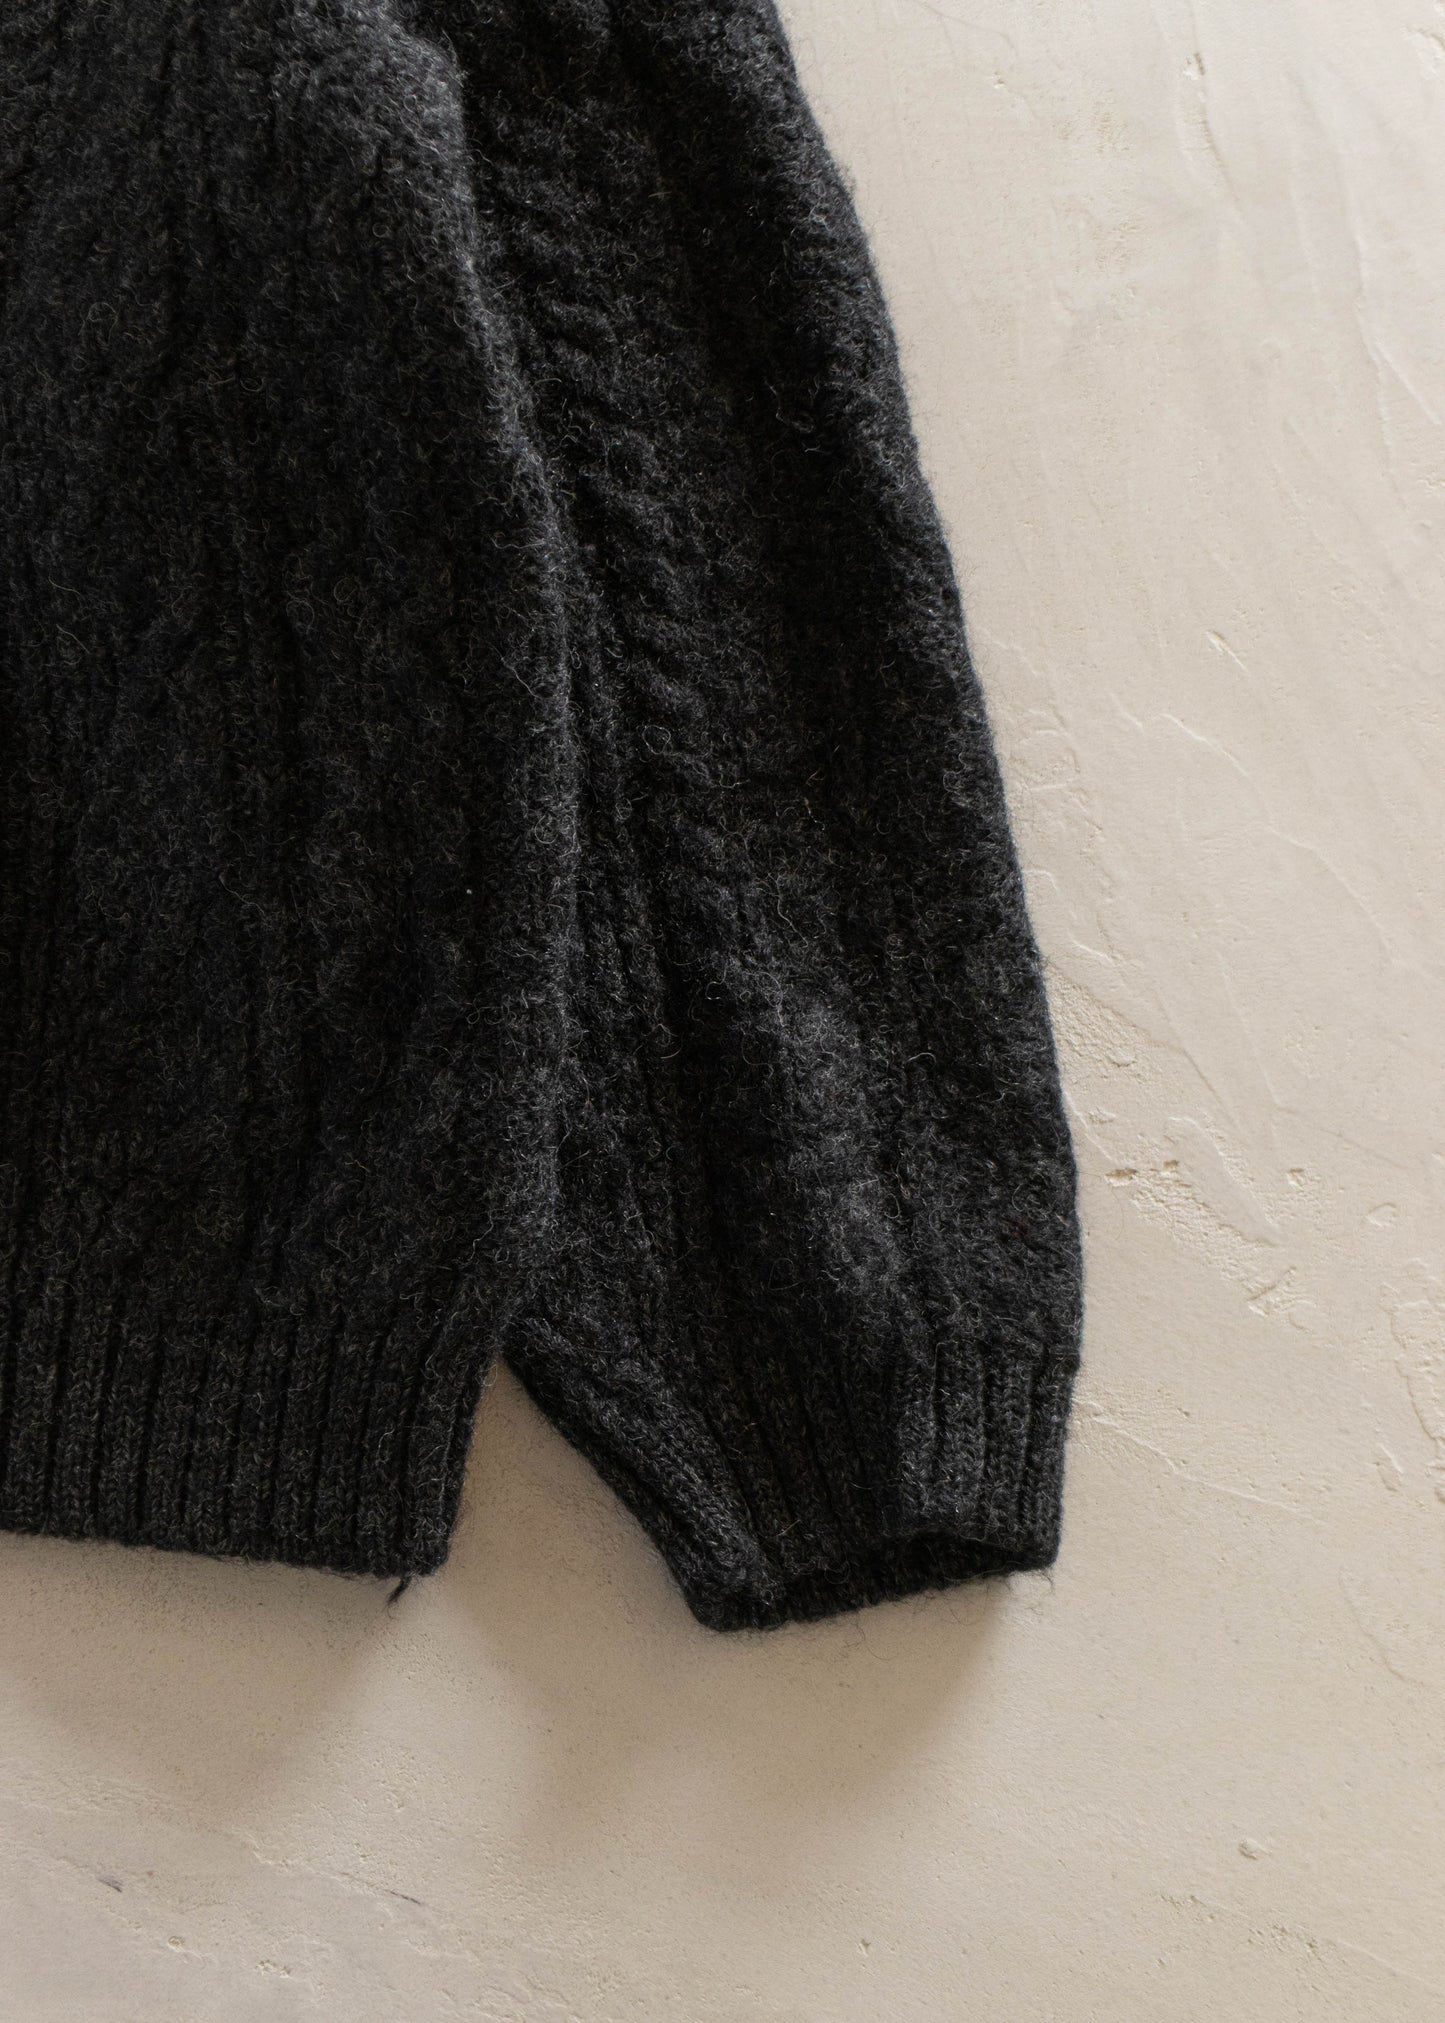 1980s British Wool Cableknit Wool Sweater Size S/M